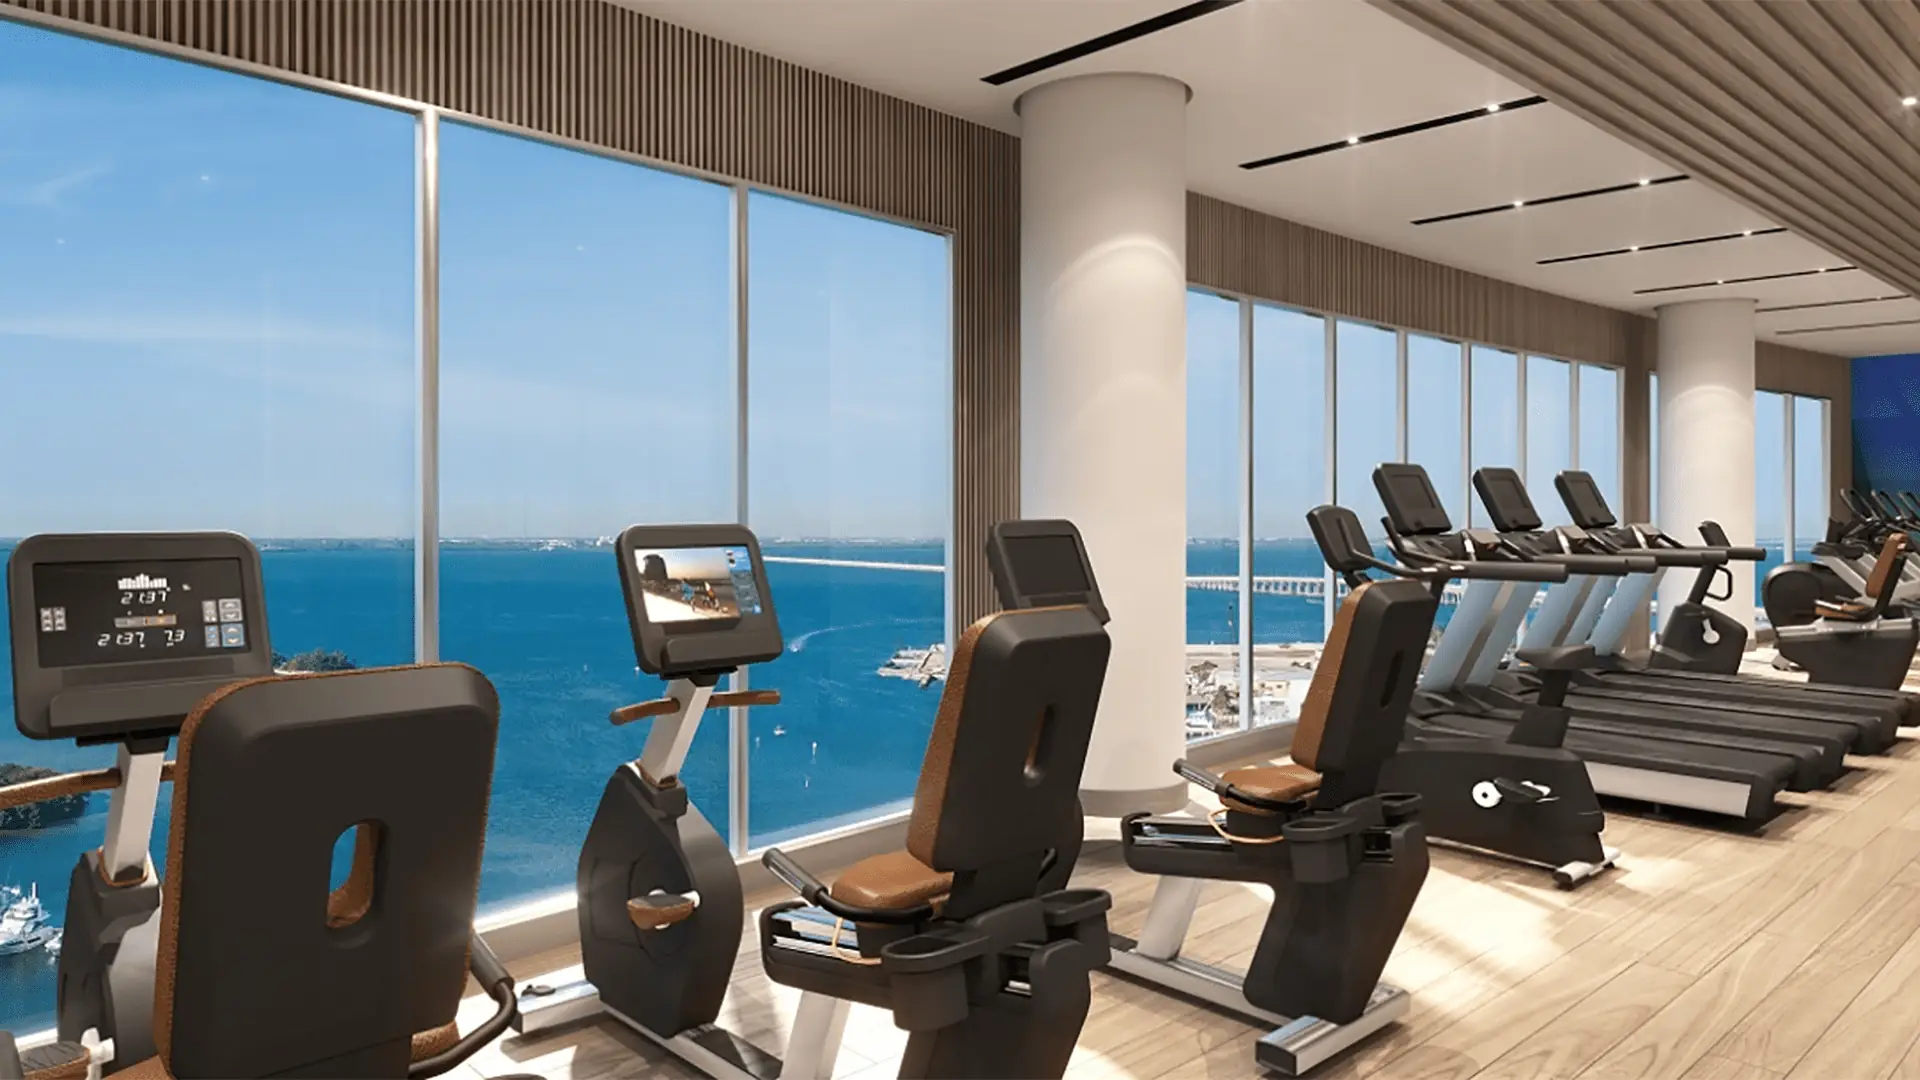 rendering of a top floor gym with rows of cardio machines set along the windows.